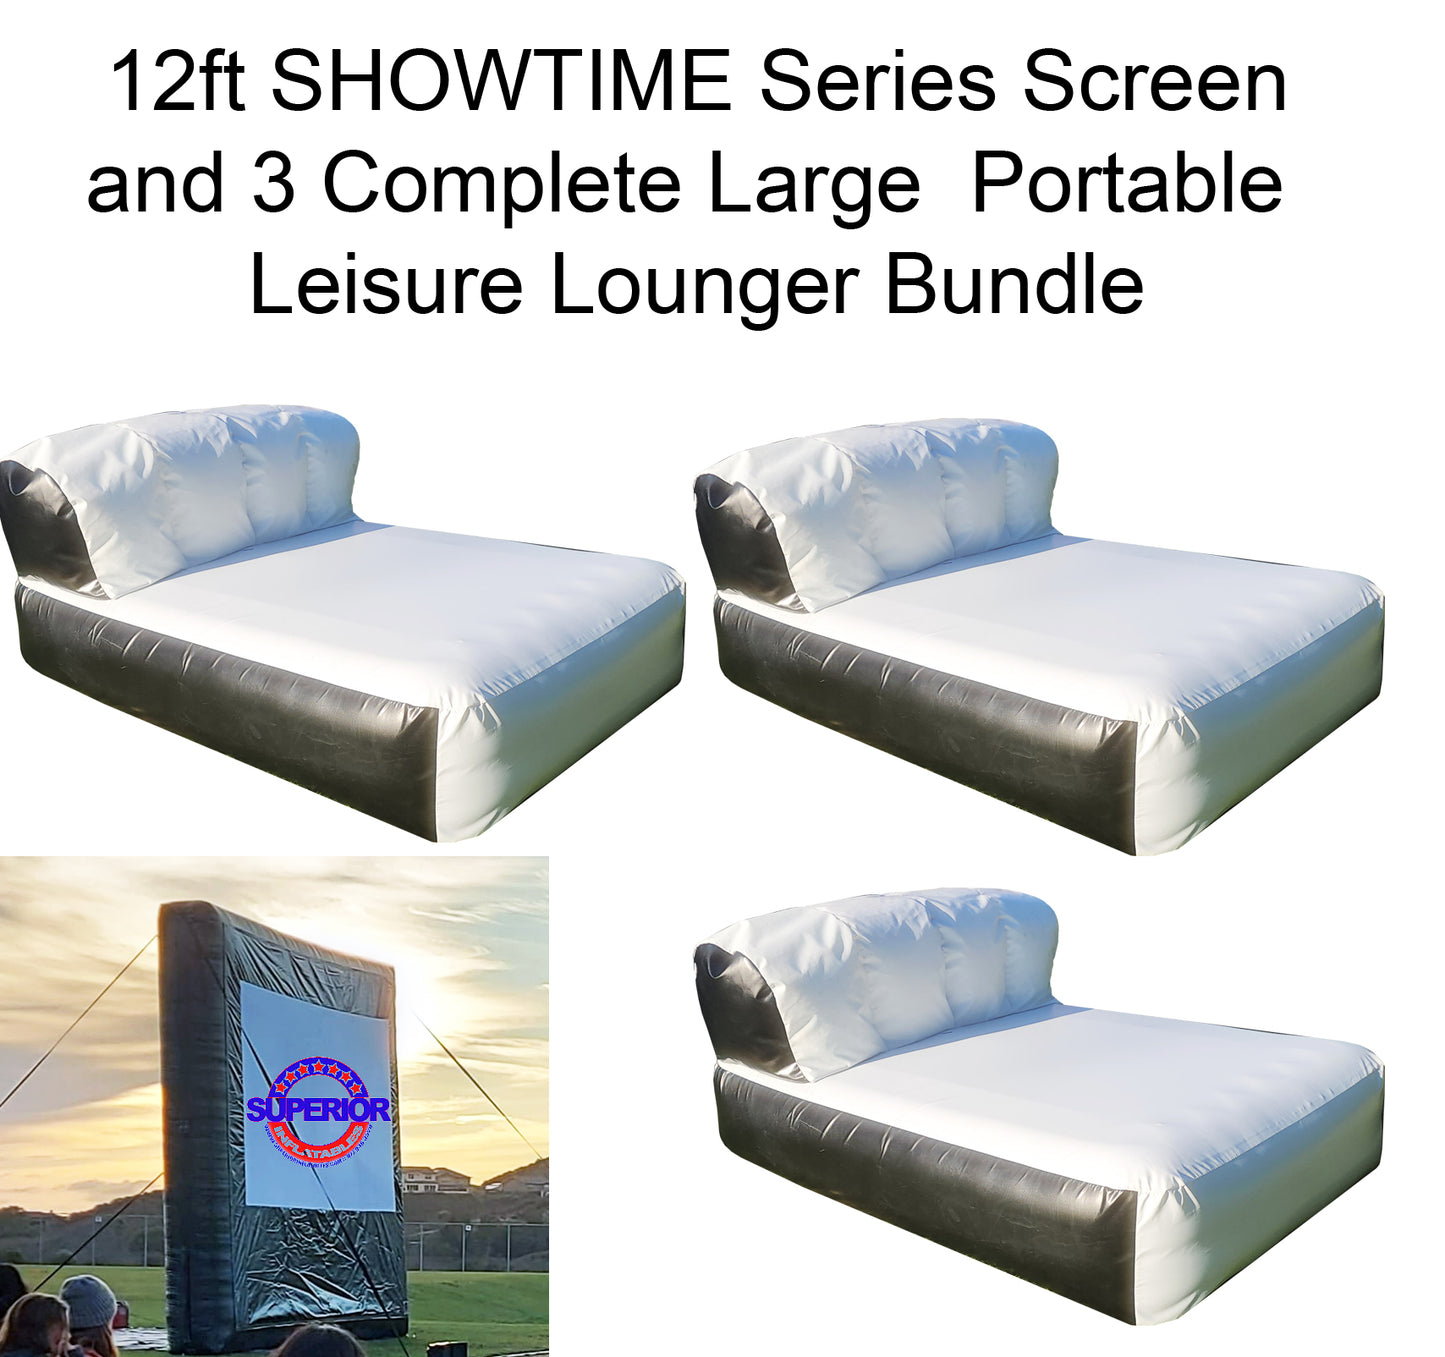 12ft SHOWTIME SCREEN and 3 Large Leisure :Lounger Bundle